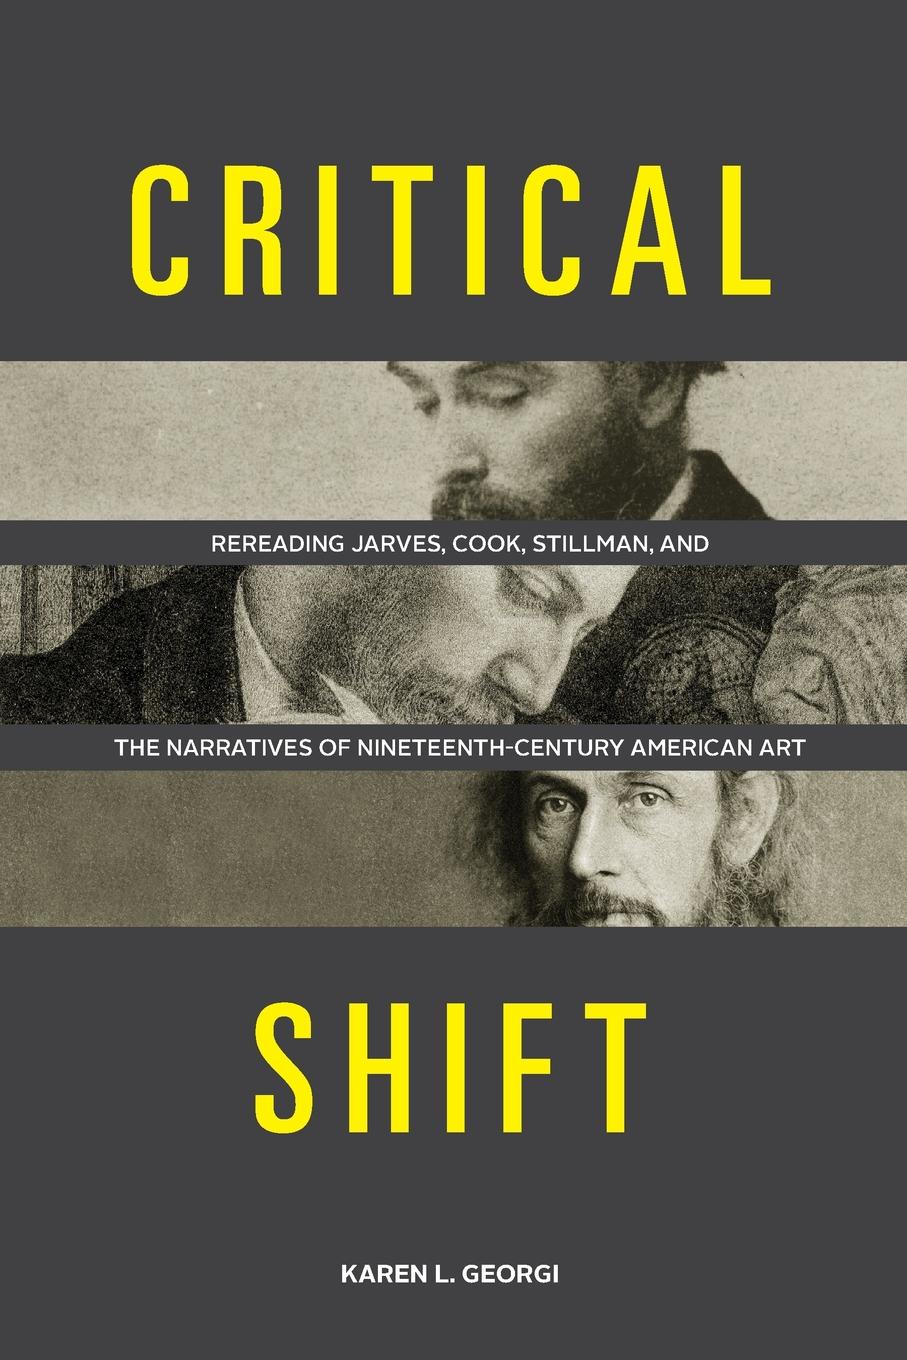 Critical Shift. Rereading Jarves, Cook, Stillman, and the Narratives of Nineteenth-Century American Art